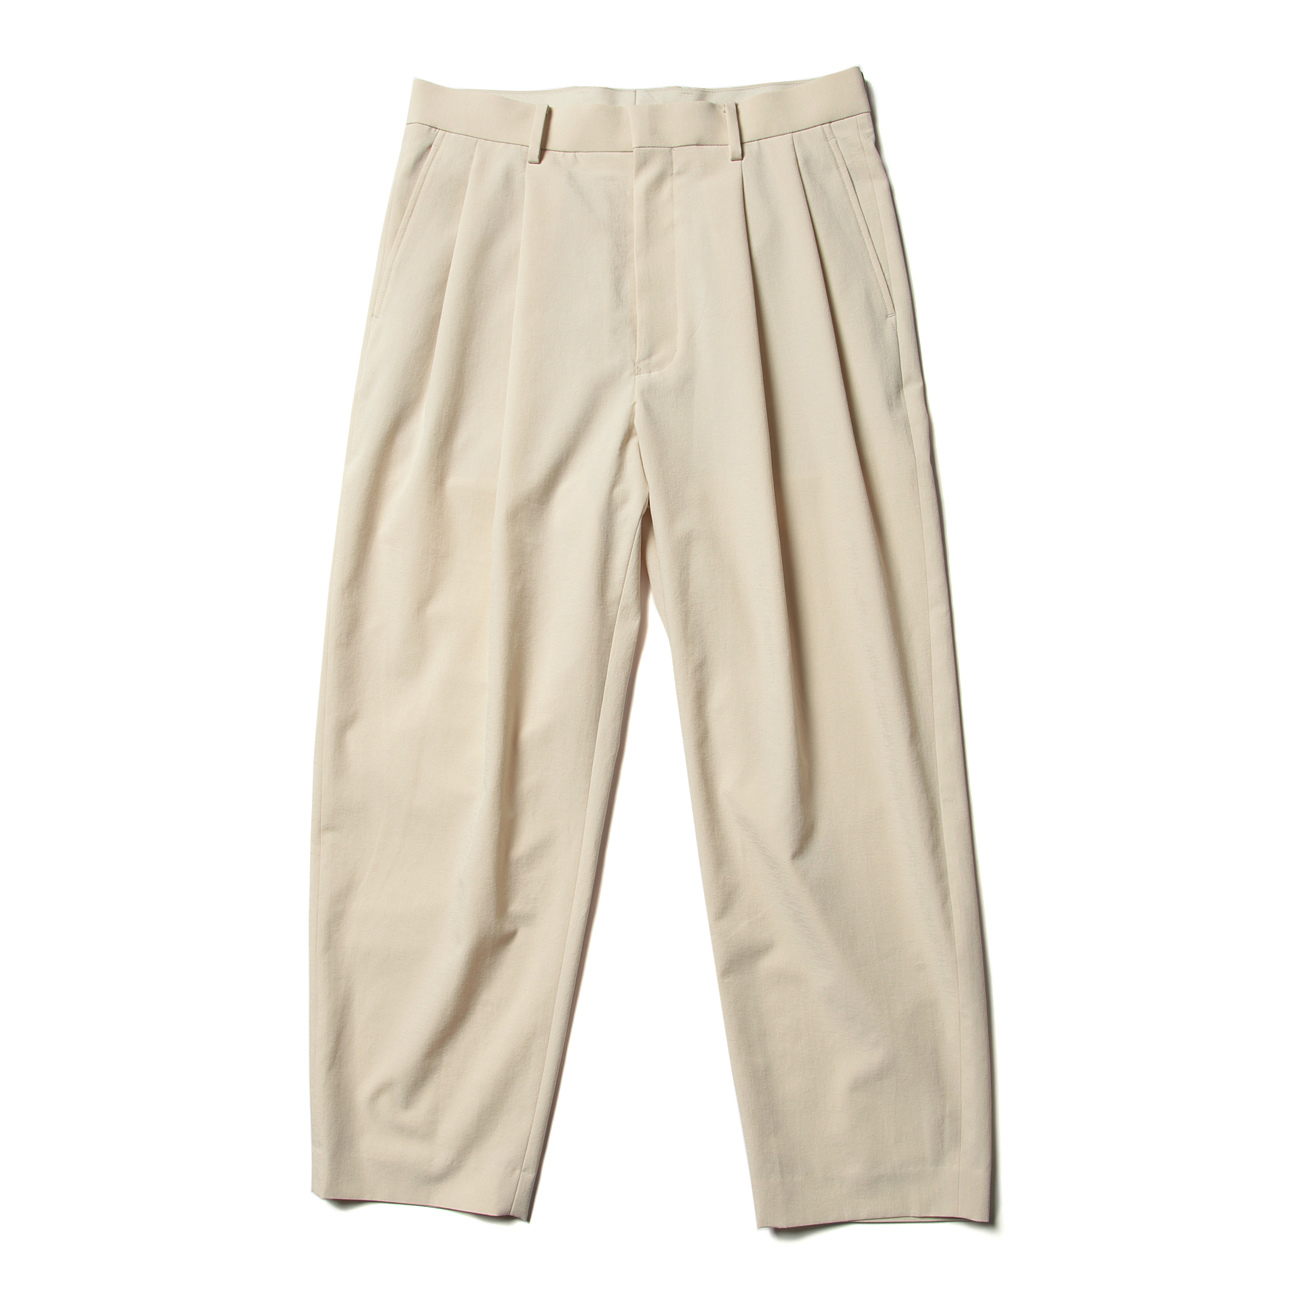 POLYESTER / 2 TUCK PANTS - Ivory